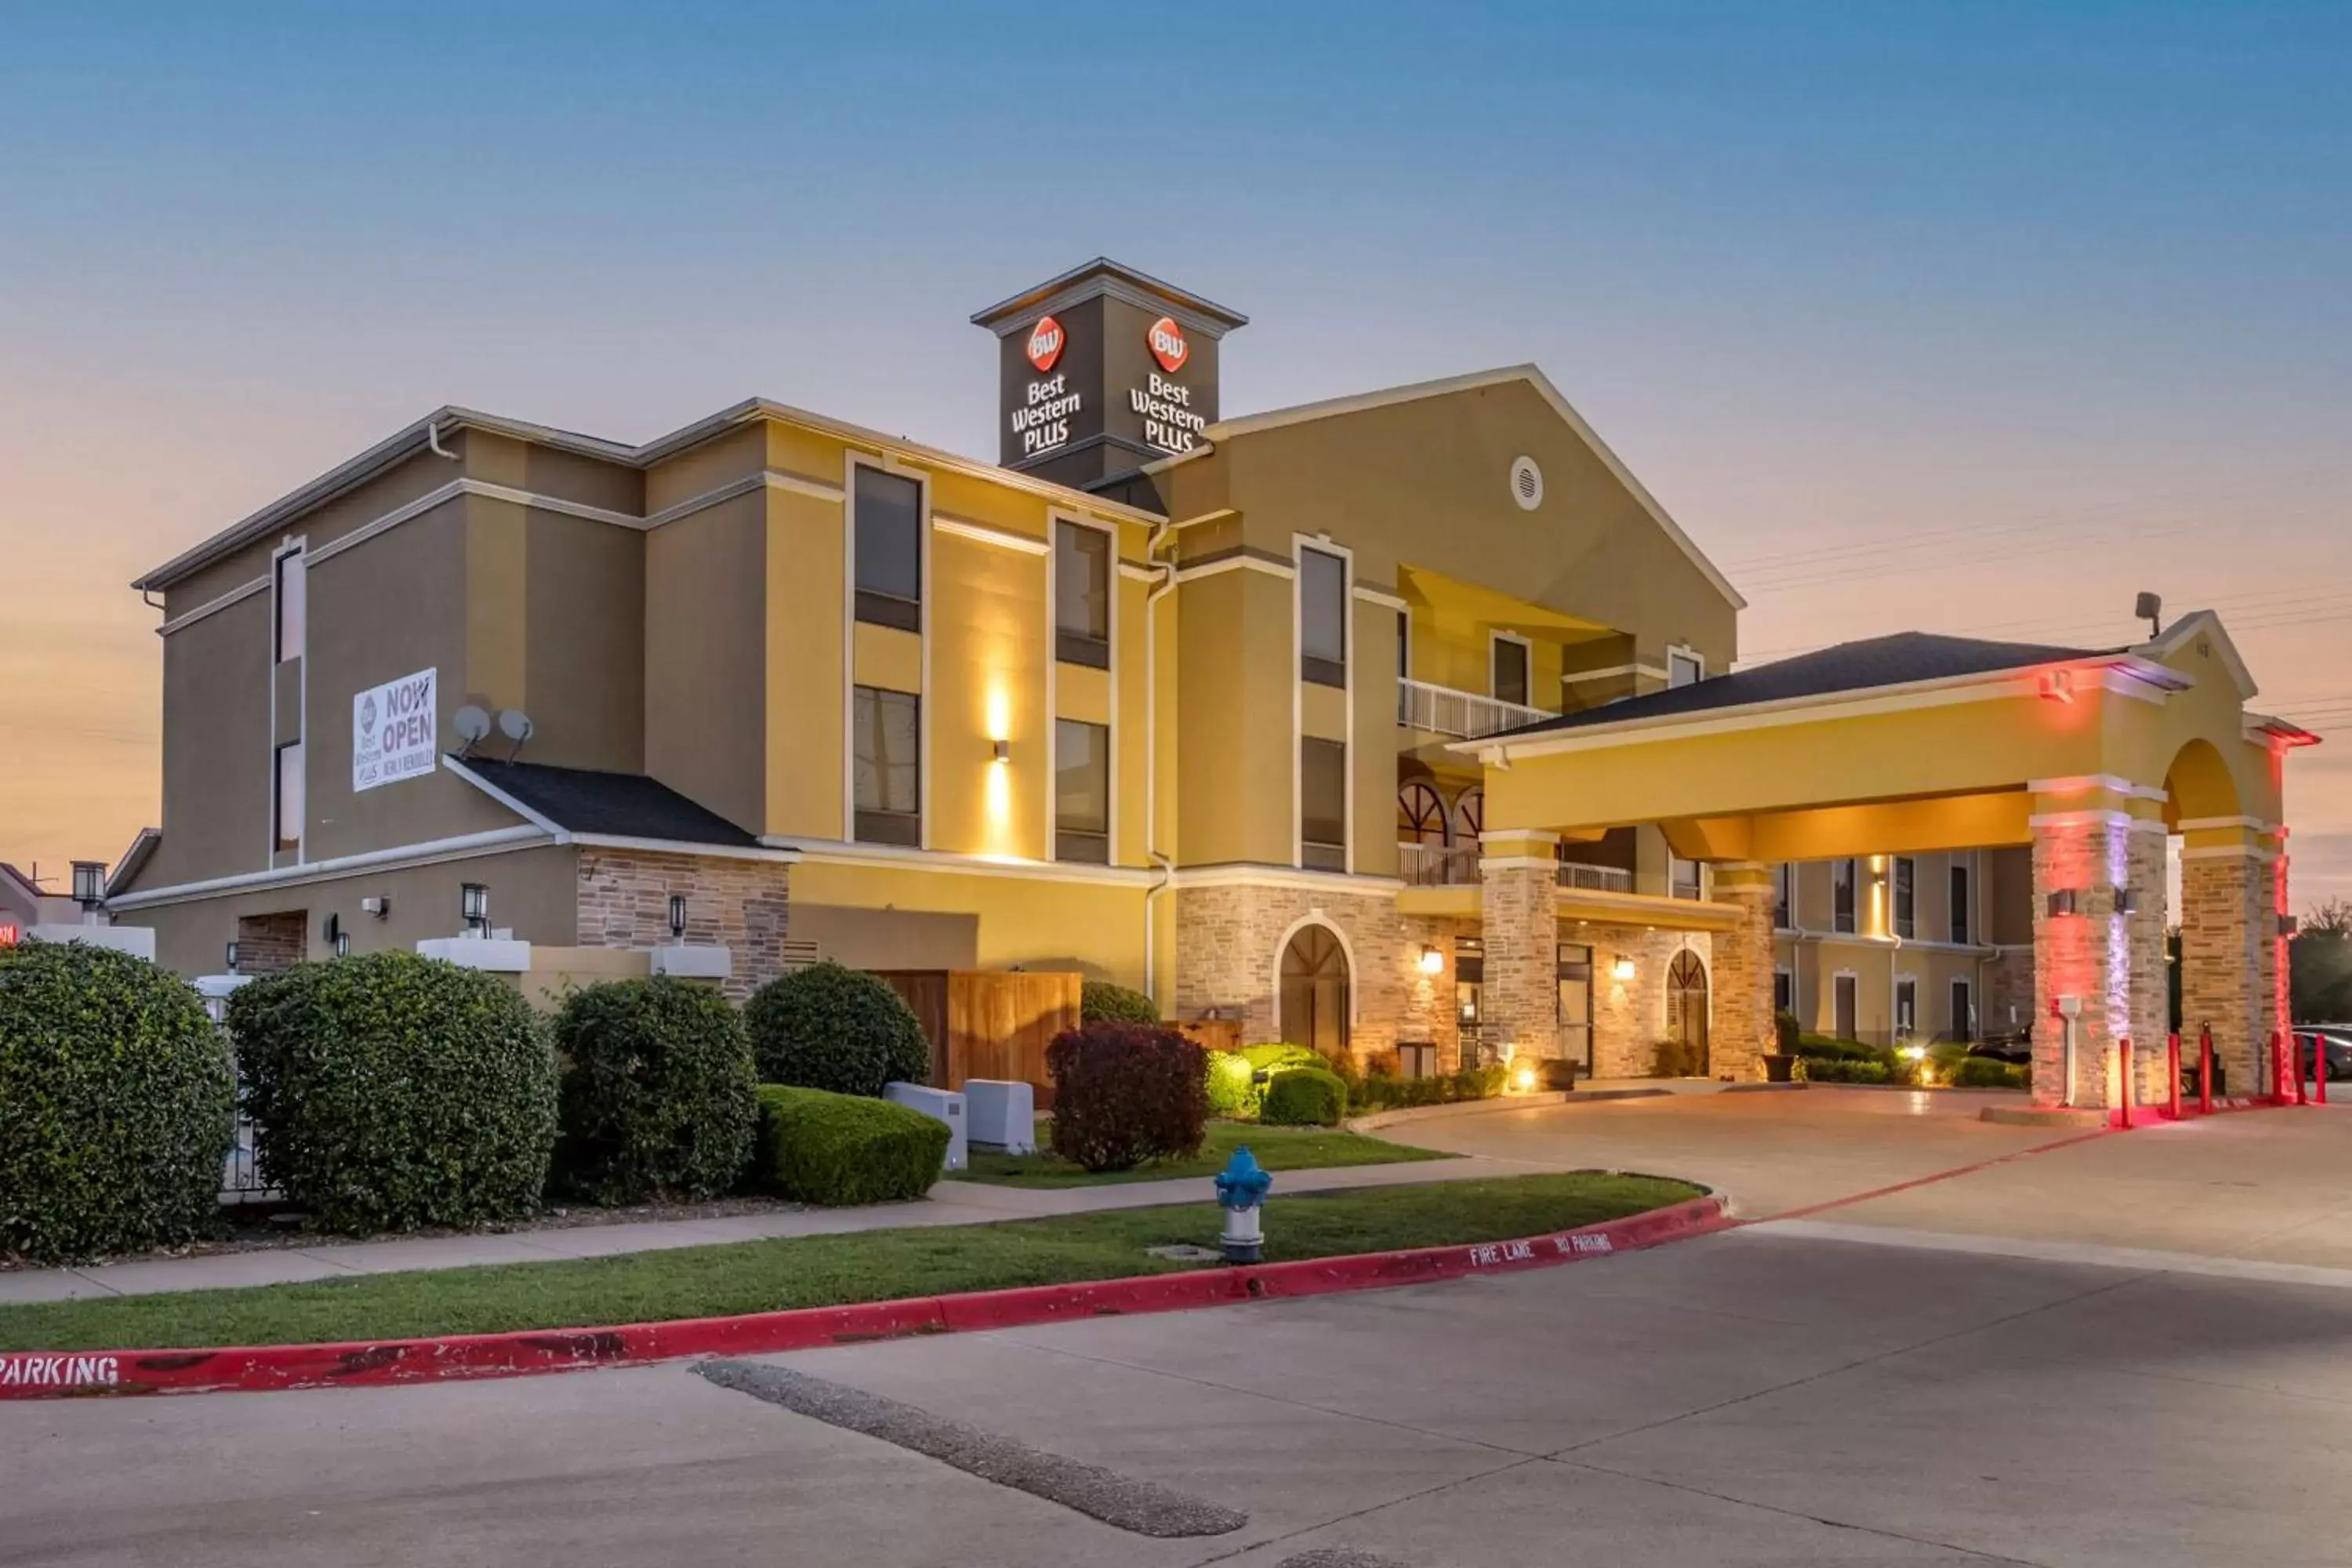 Property Building in Best Western Plus McKinney Inn and Suites